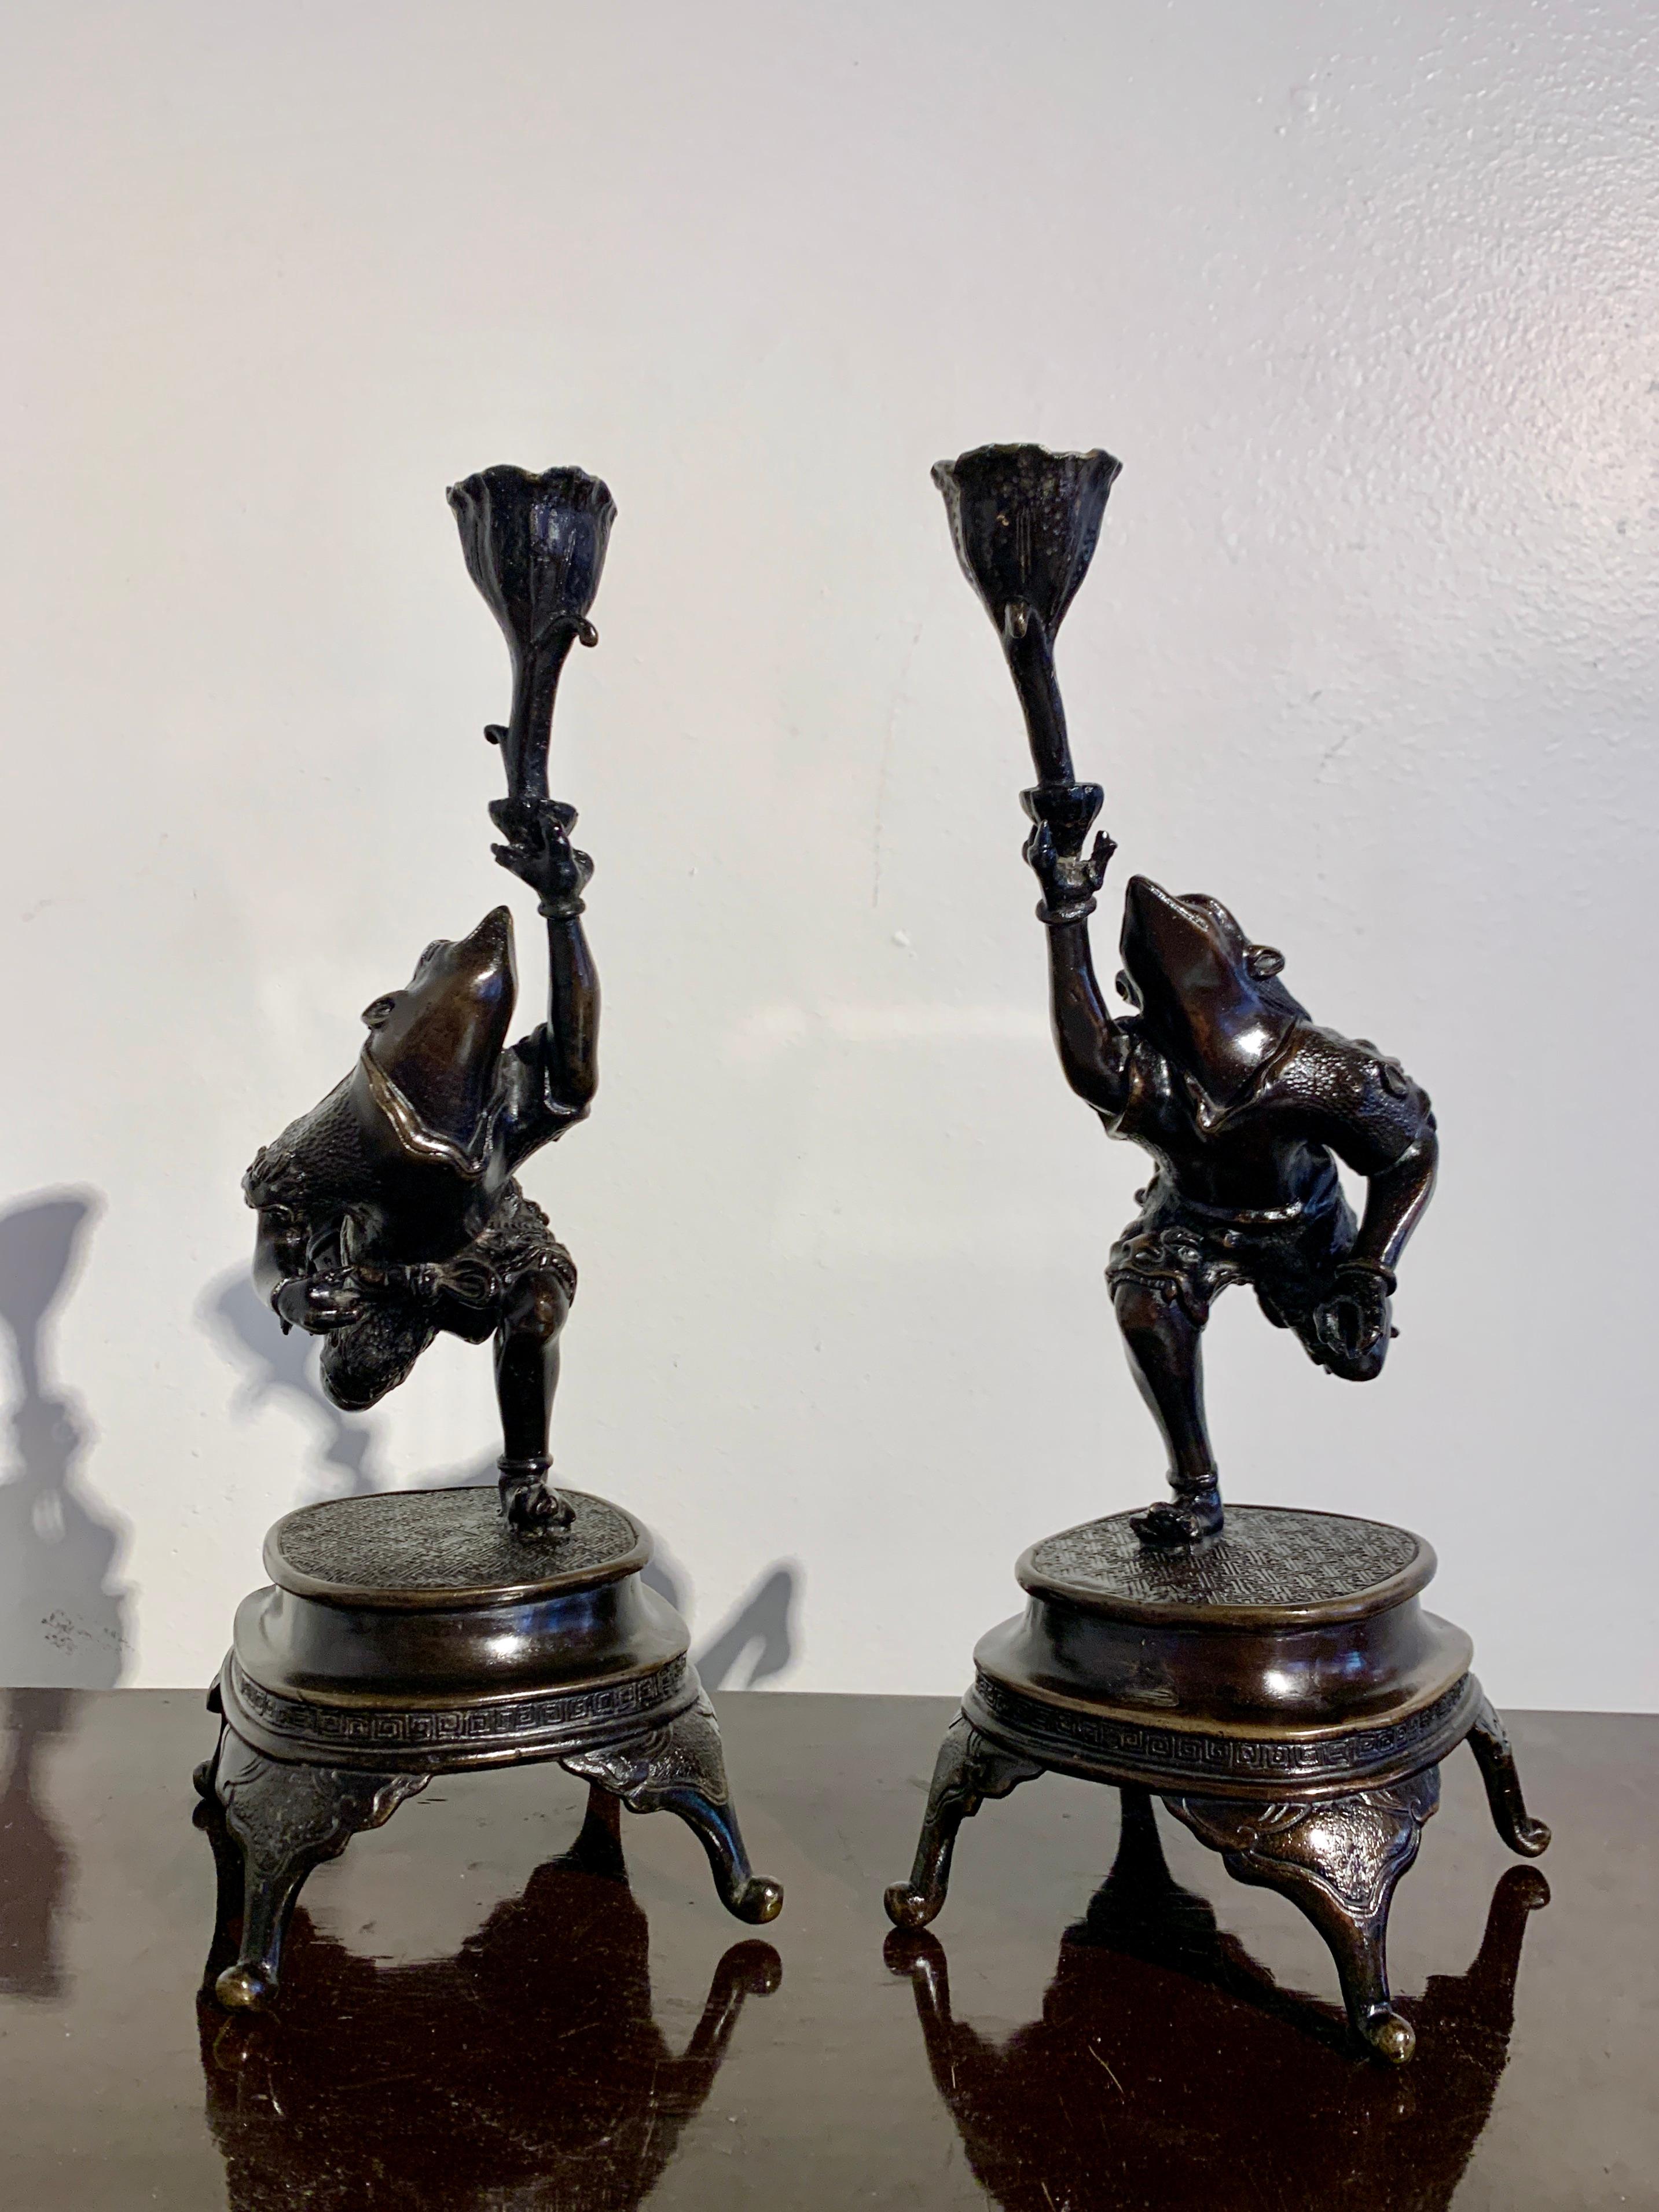 A fantastic and fabulous pair of Japanese cast bronze candlesticks in the form of armored frog warriors, Meiji Period, circa 1900, Japan.

The delightful mirrored pair of bronze candleholders modeled as warrior frogs wearing armor. The frogs